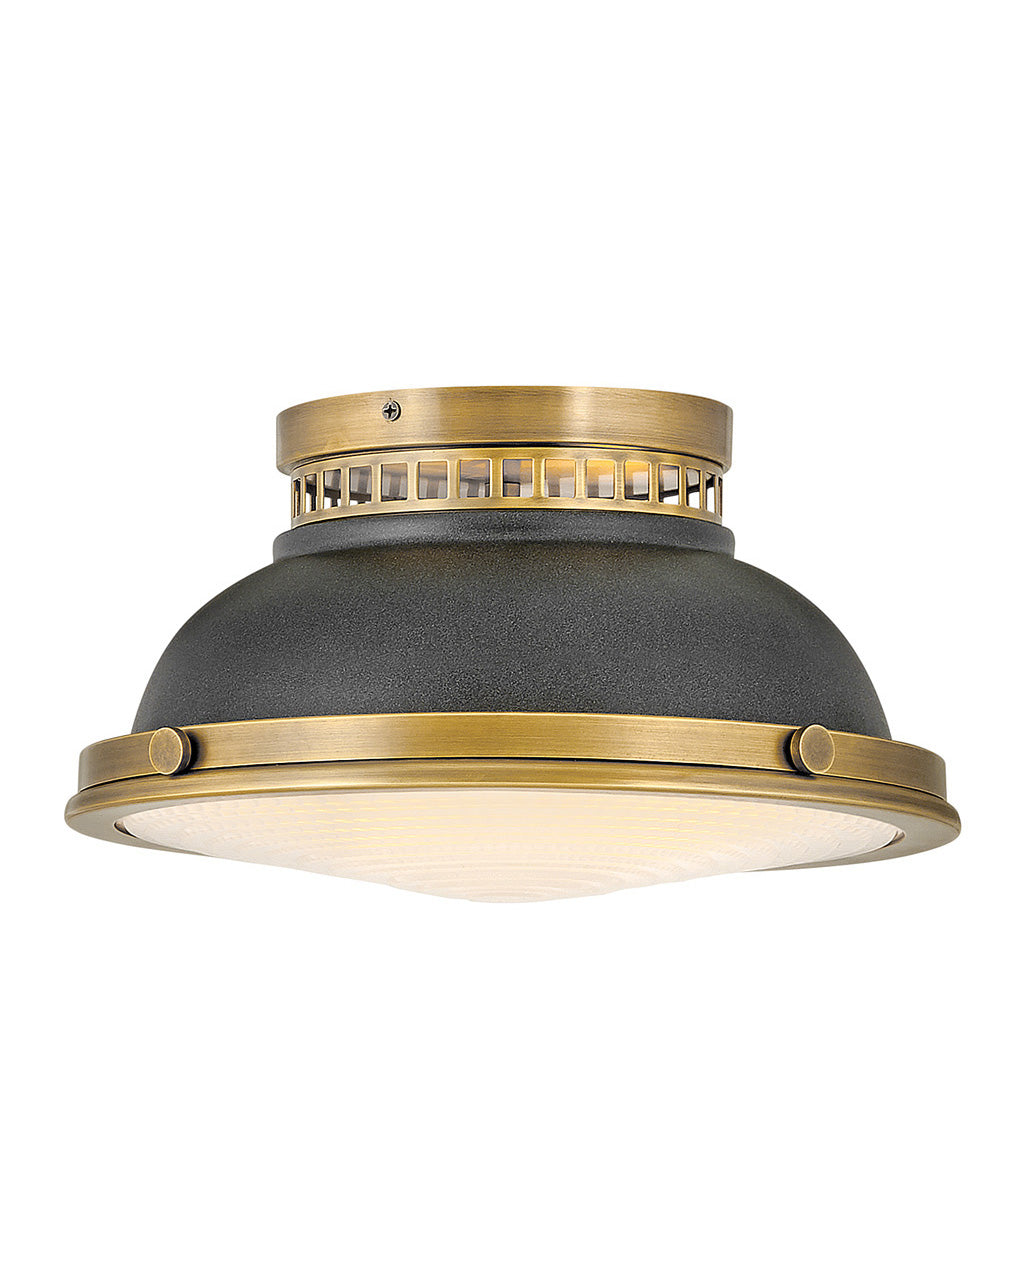 Hinkley Emery Flush Mount Flush Mount Ceiling Light Hinkley Heritage Brass with Aged Zinc accents 12.75x12.75x6.75 